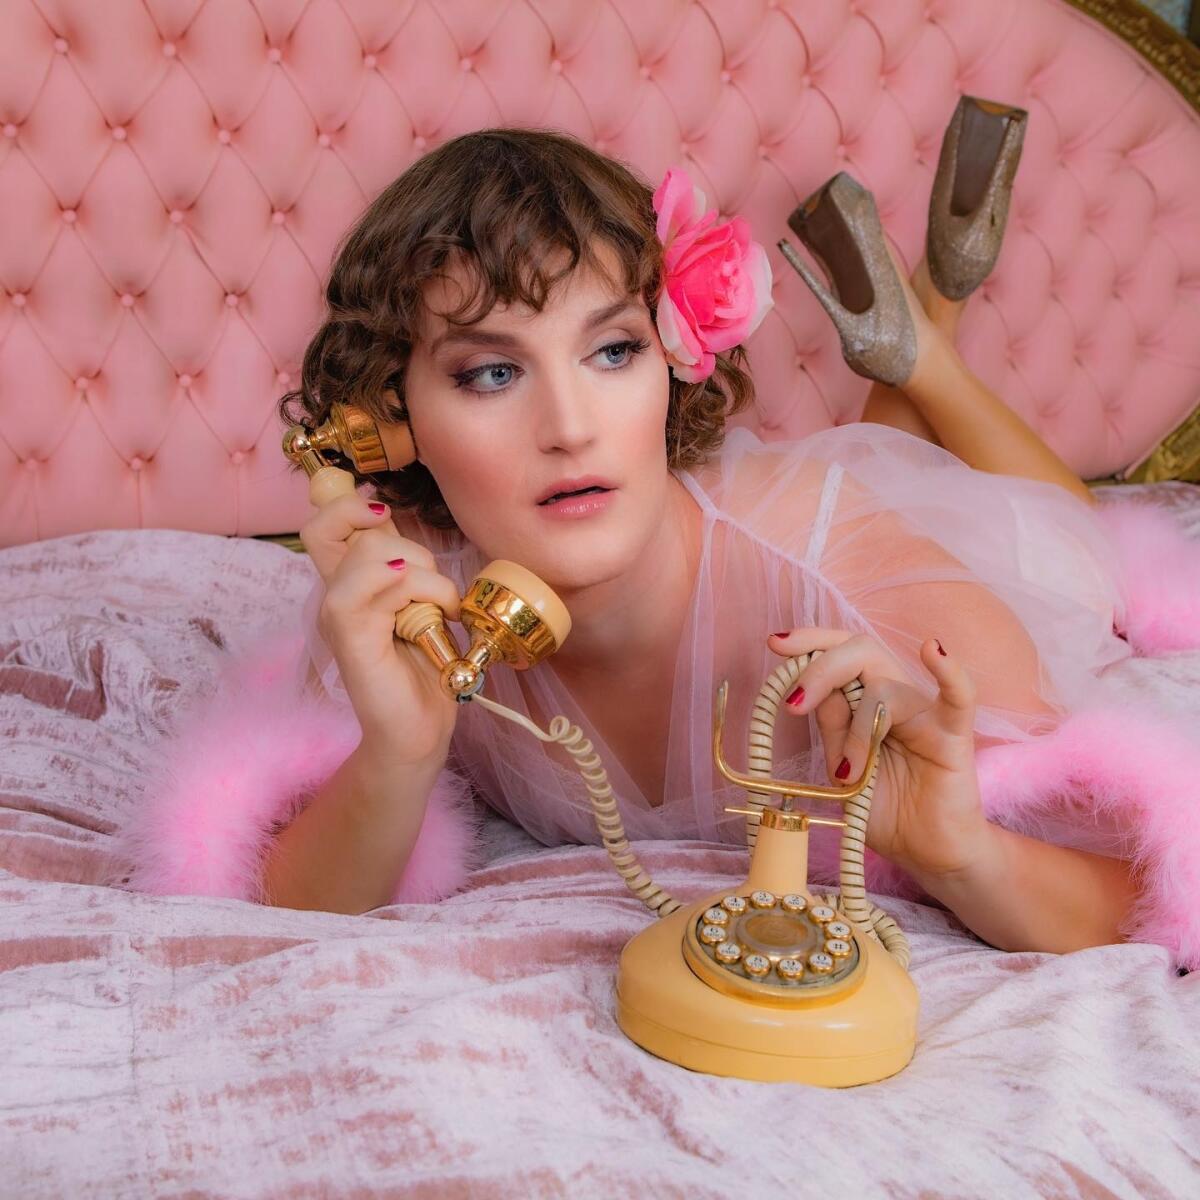 A person lying on a bed in frilly pink holding the receiver of an old-fashioned telephone